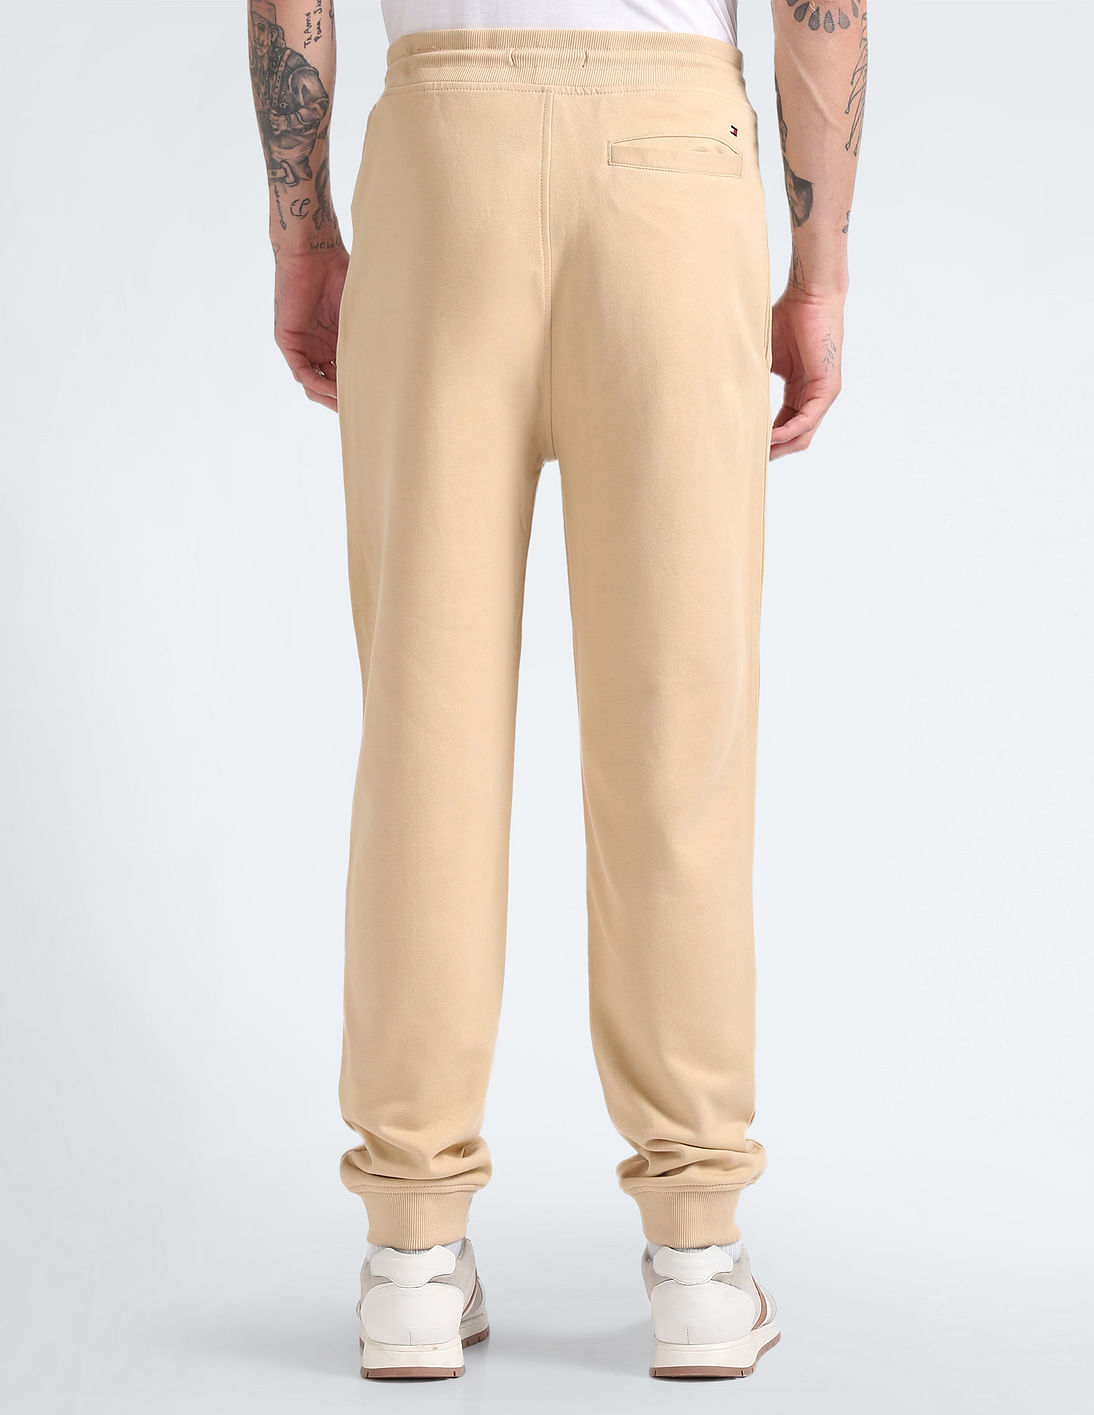 Tommy Hilfiger MODAL PANTS Beige - Fast delivery  Spartoo Europe ! -  Clothing jogging bottoms Women 70,40 €